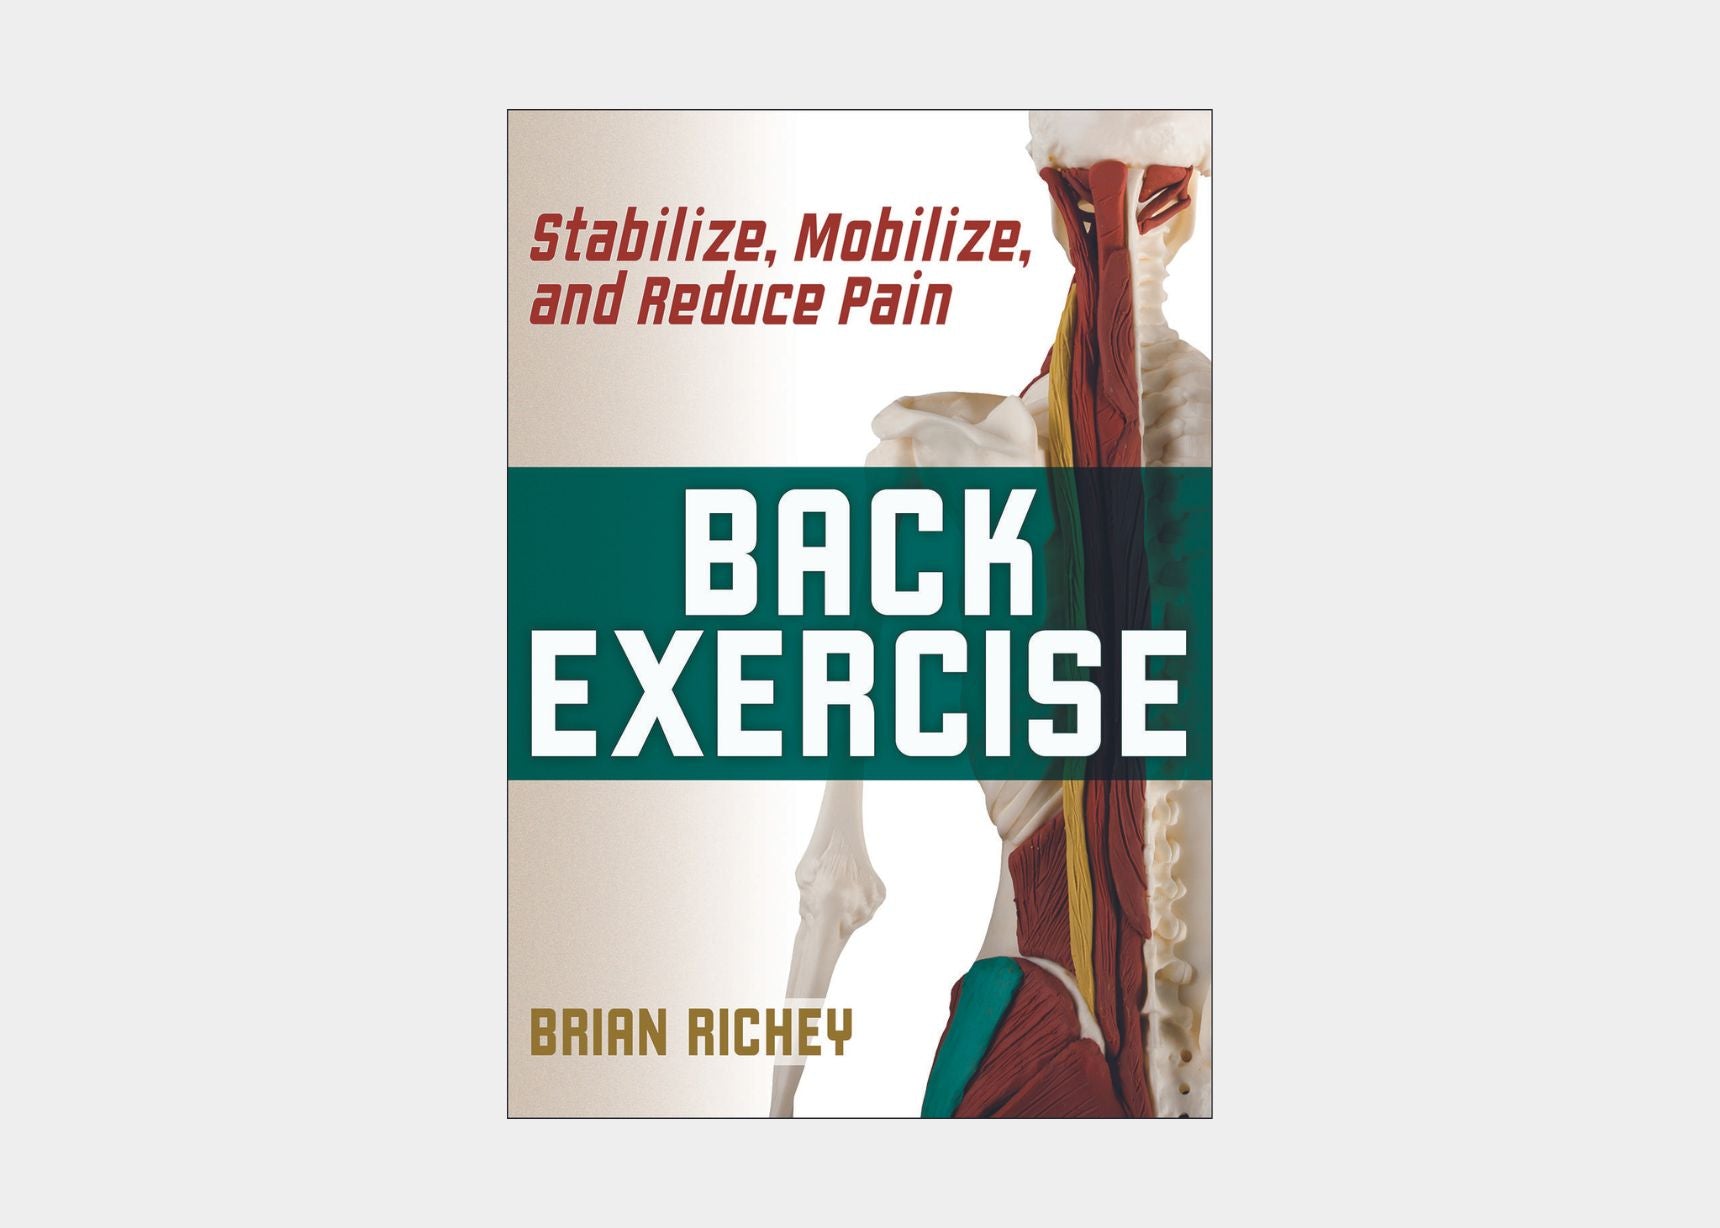 Back Exercise Cover by Brian Richey